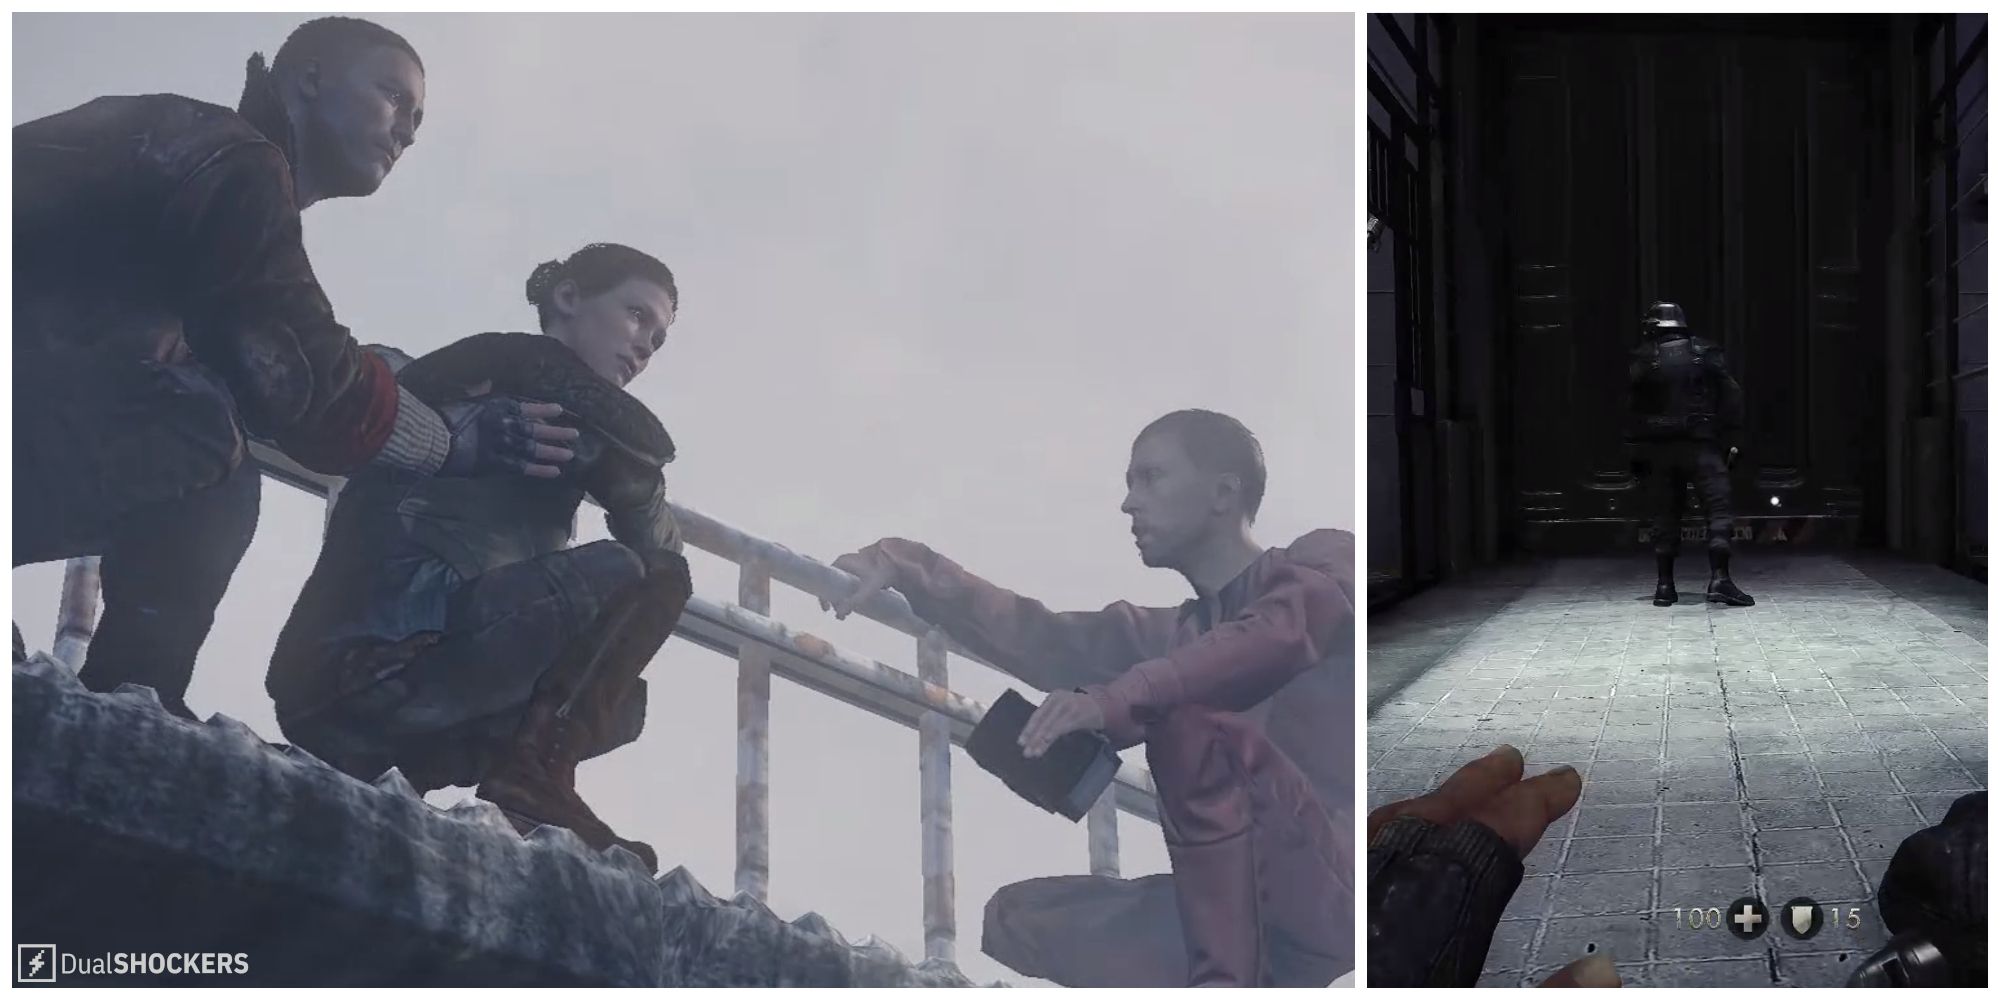 Split image of Blazkowicz, Anya, and Fergus escaping the prison and an enemy inside the prison in Wolfenstein: The New Order.